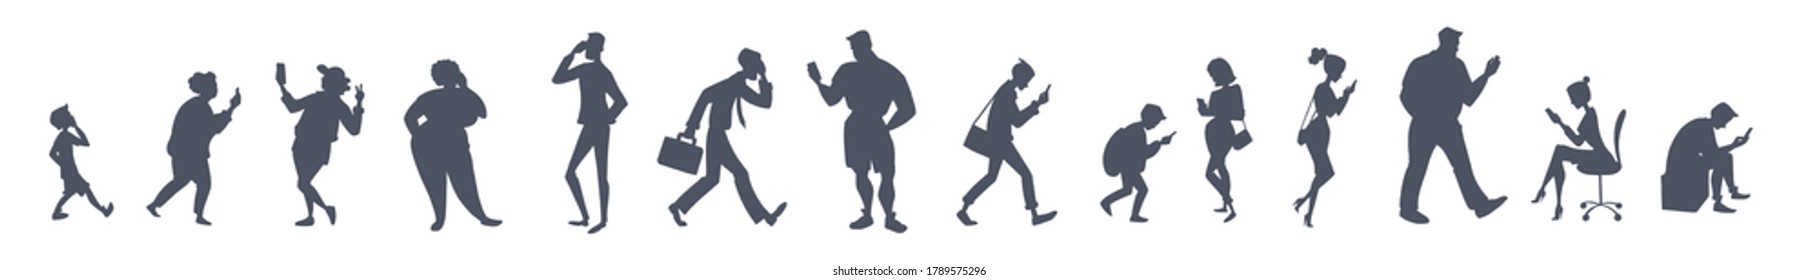 Silhouettes of people with smartphones. People and technology concept banner. Diverse group of women and men talking, texting, searching internet. Vector characters isolated on white.  - Shutterstock ID 1789575296